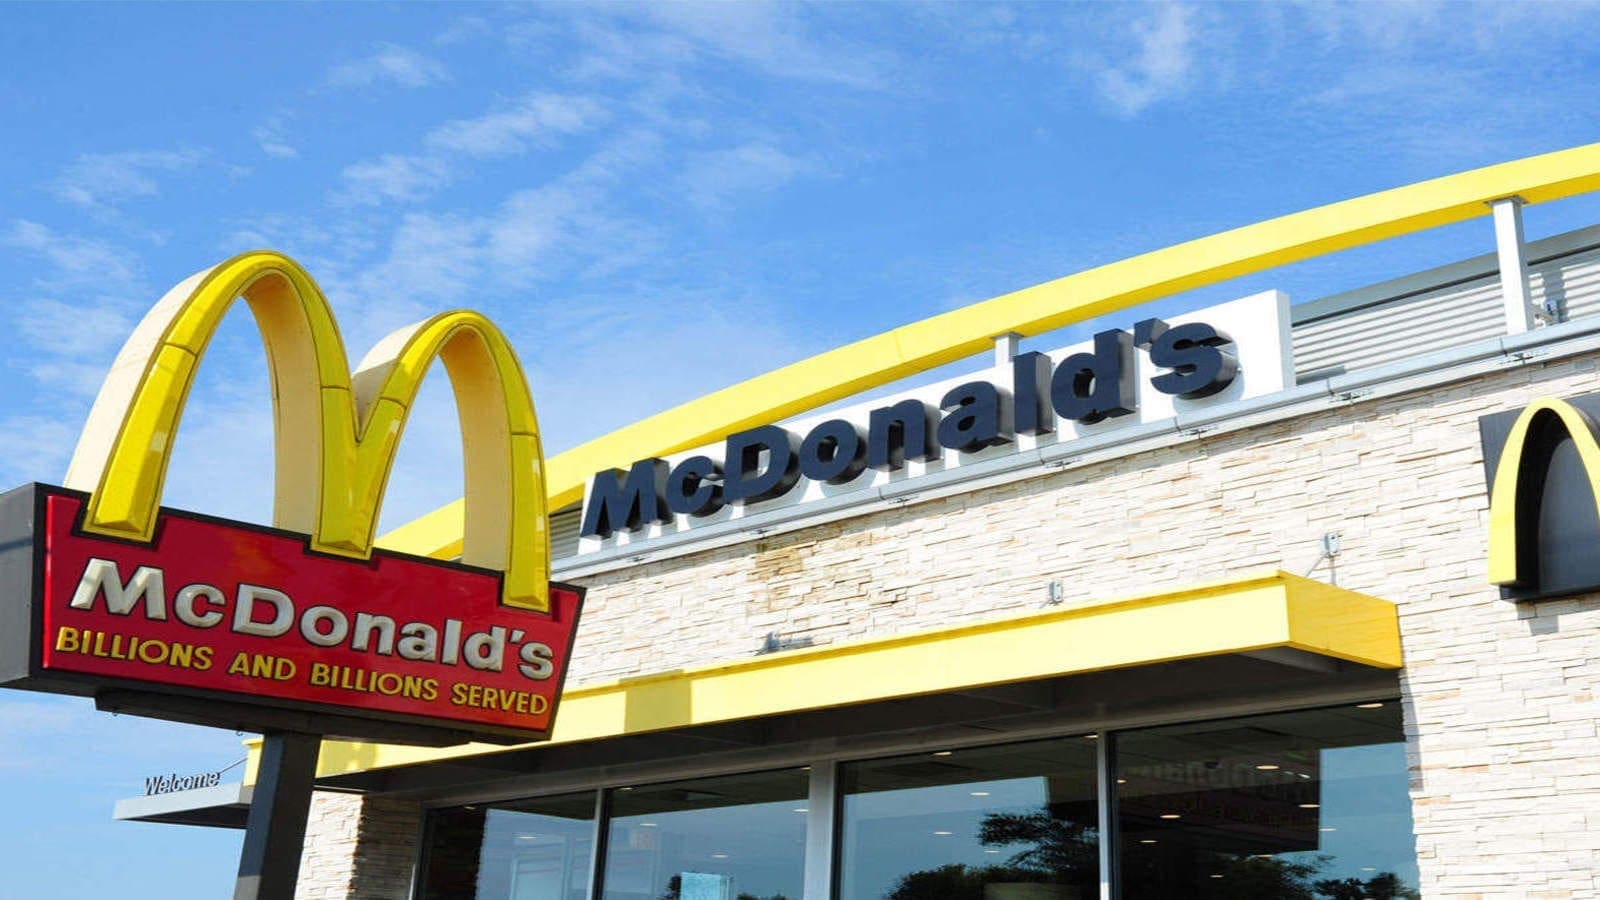 McDonald’s Indian franchise goes on a market share offensive, reveals plans to launch 200 stores in the next 5 years